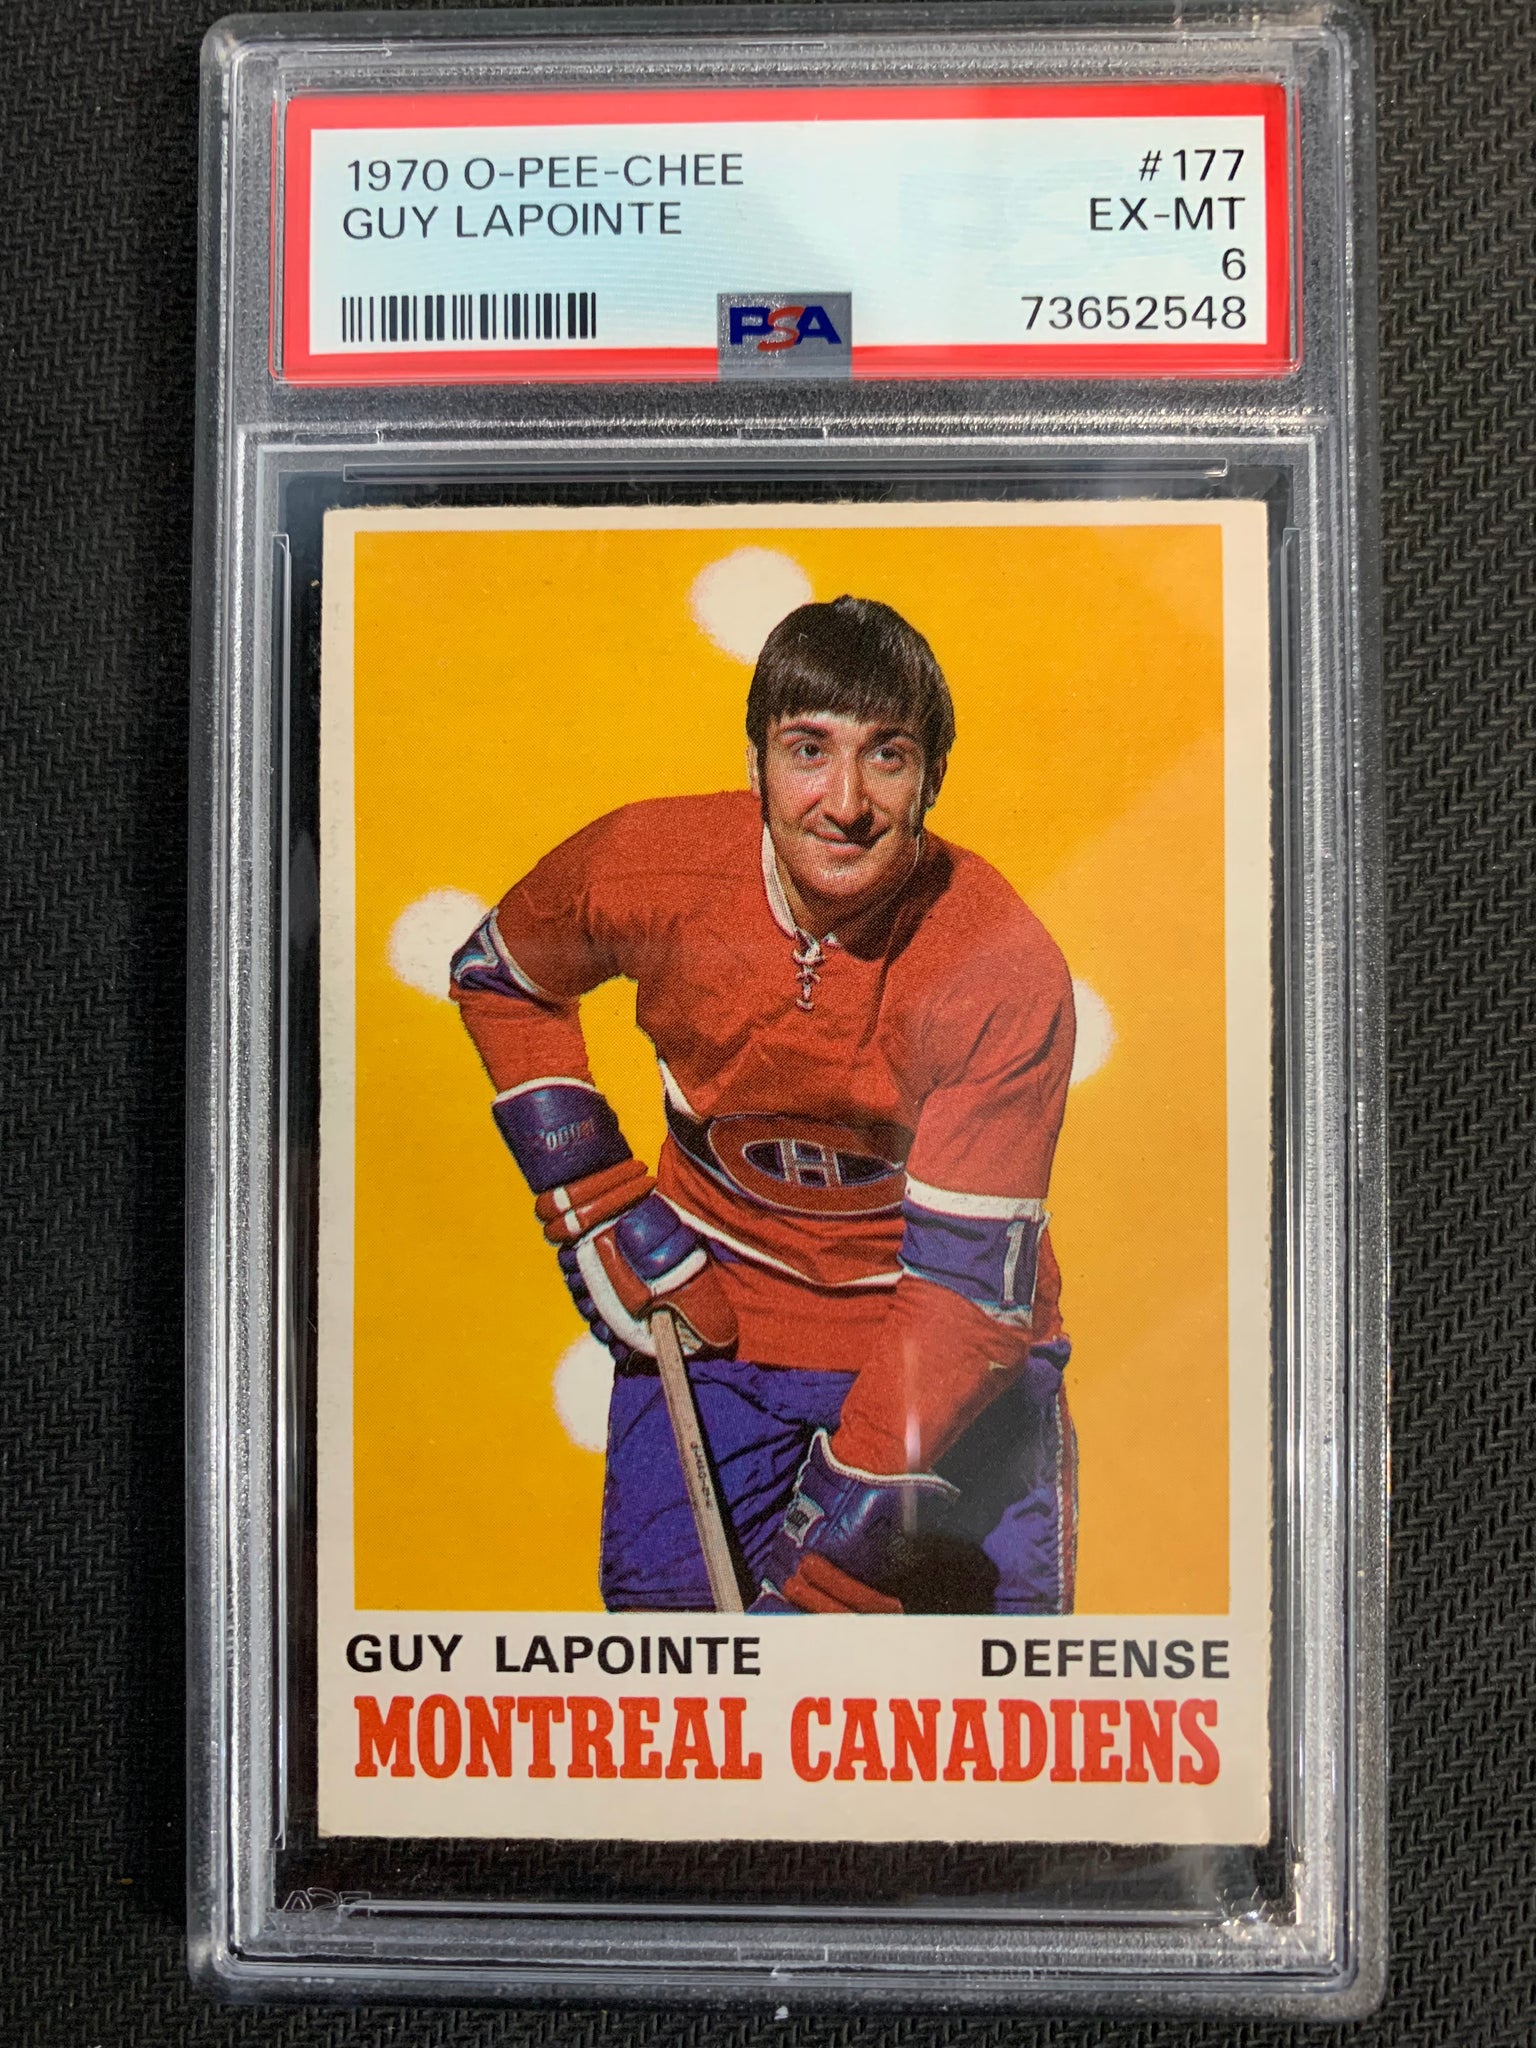 1970-71 O-PEE-CHEE HOCKEY #177 MONTREAL CANADIENS - GUY LAPOINTE ROOKIE CARD GRADED PSA 6 EX-MT